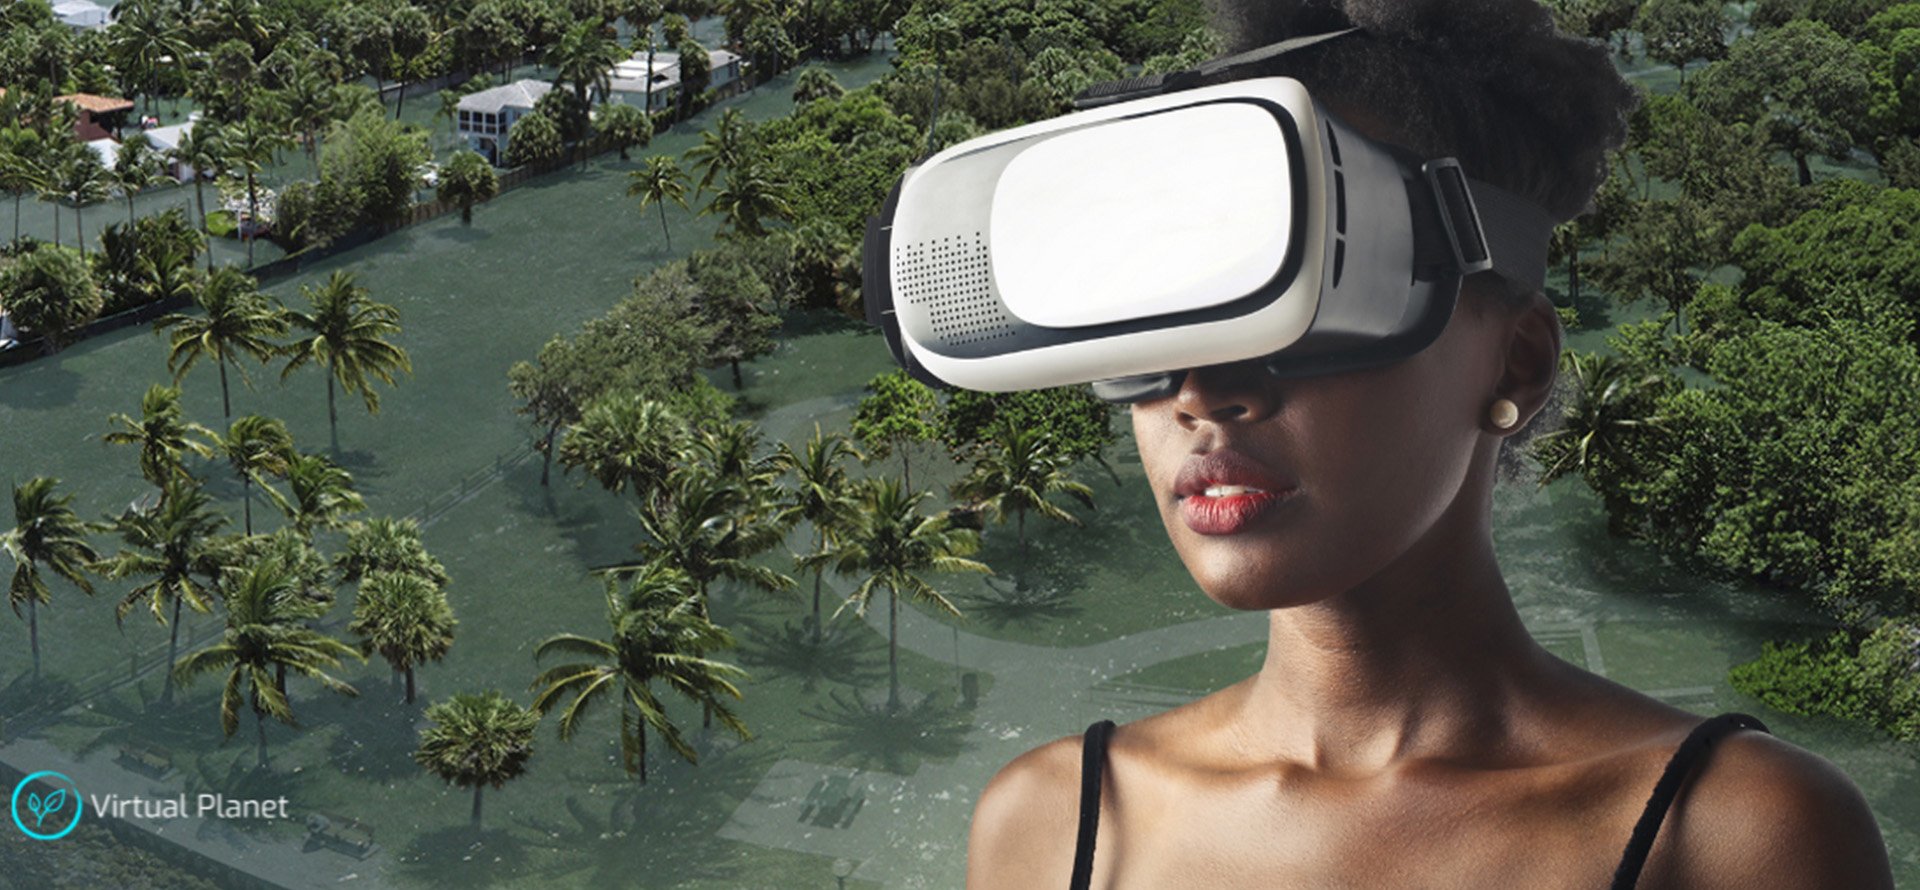 West Palm Beach’s virtual reality (VR) experience